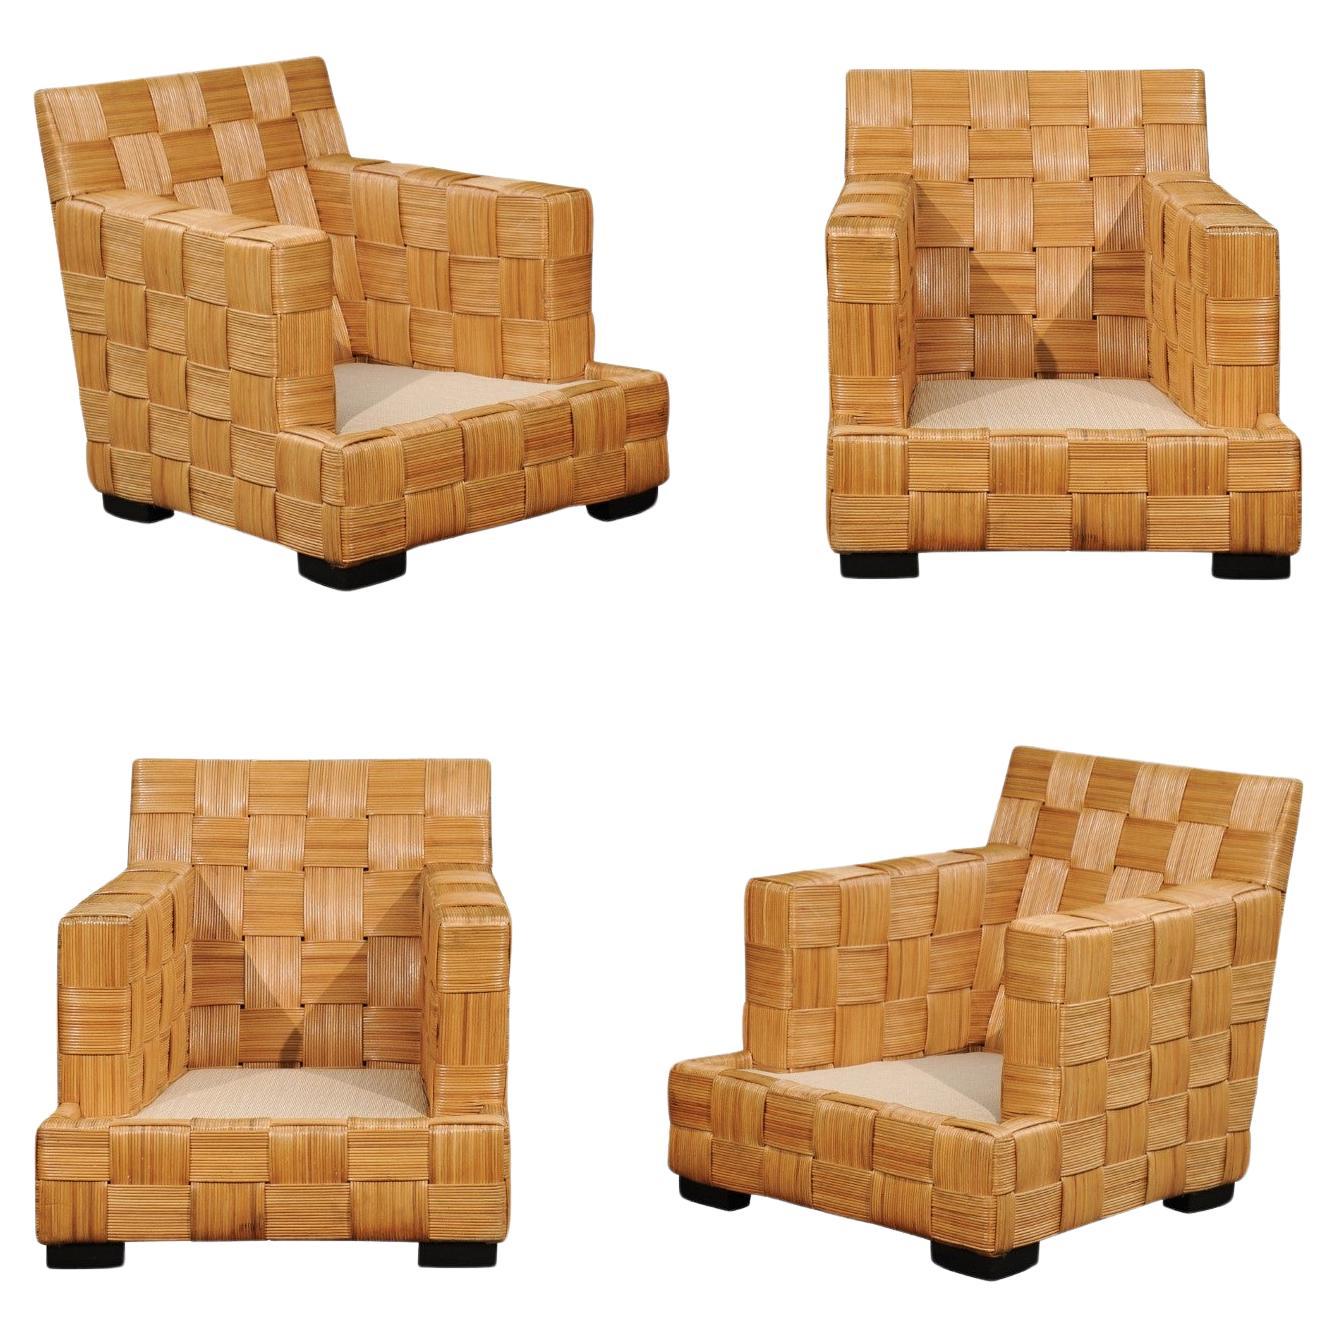 Unforgettable Set of of 4 Block Island Cane Chairs by John Hutton for Donghia For Sale